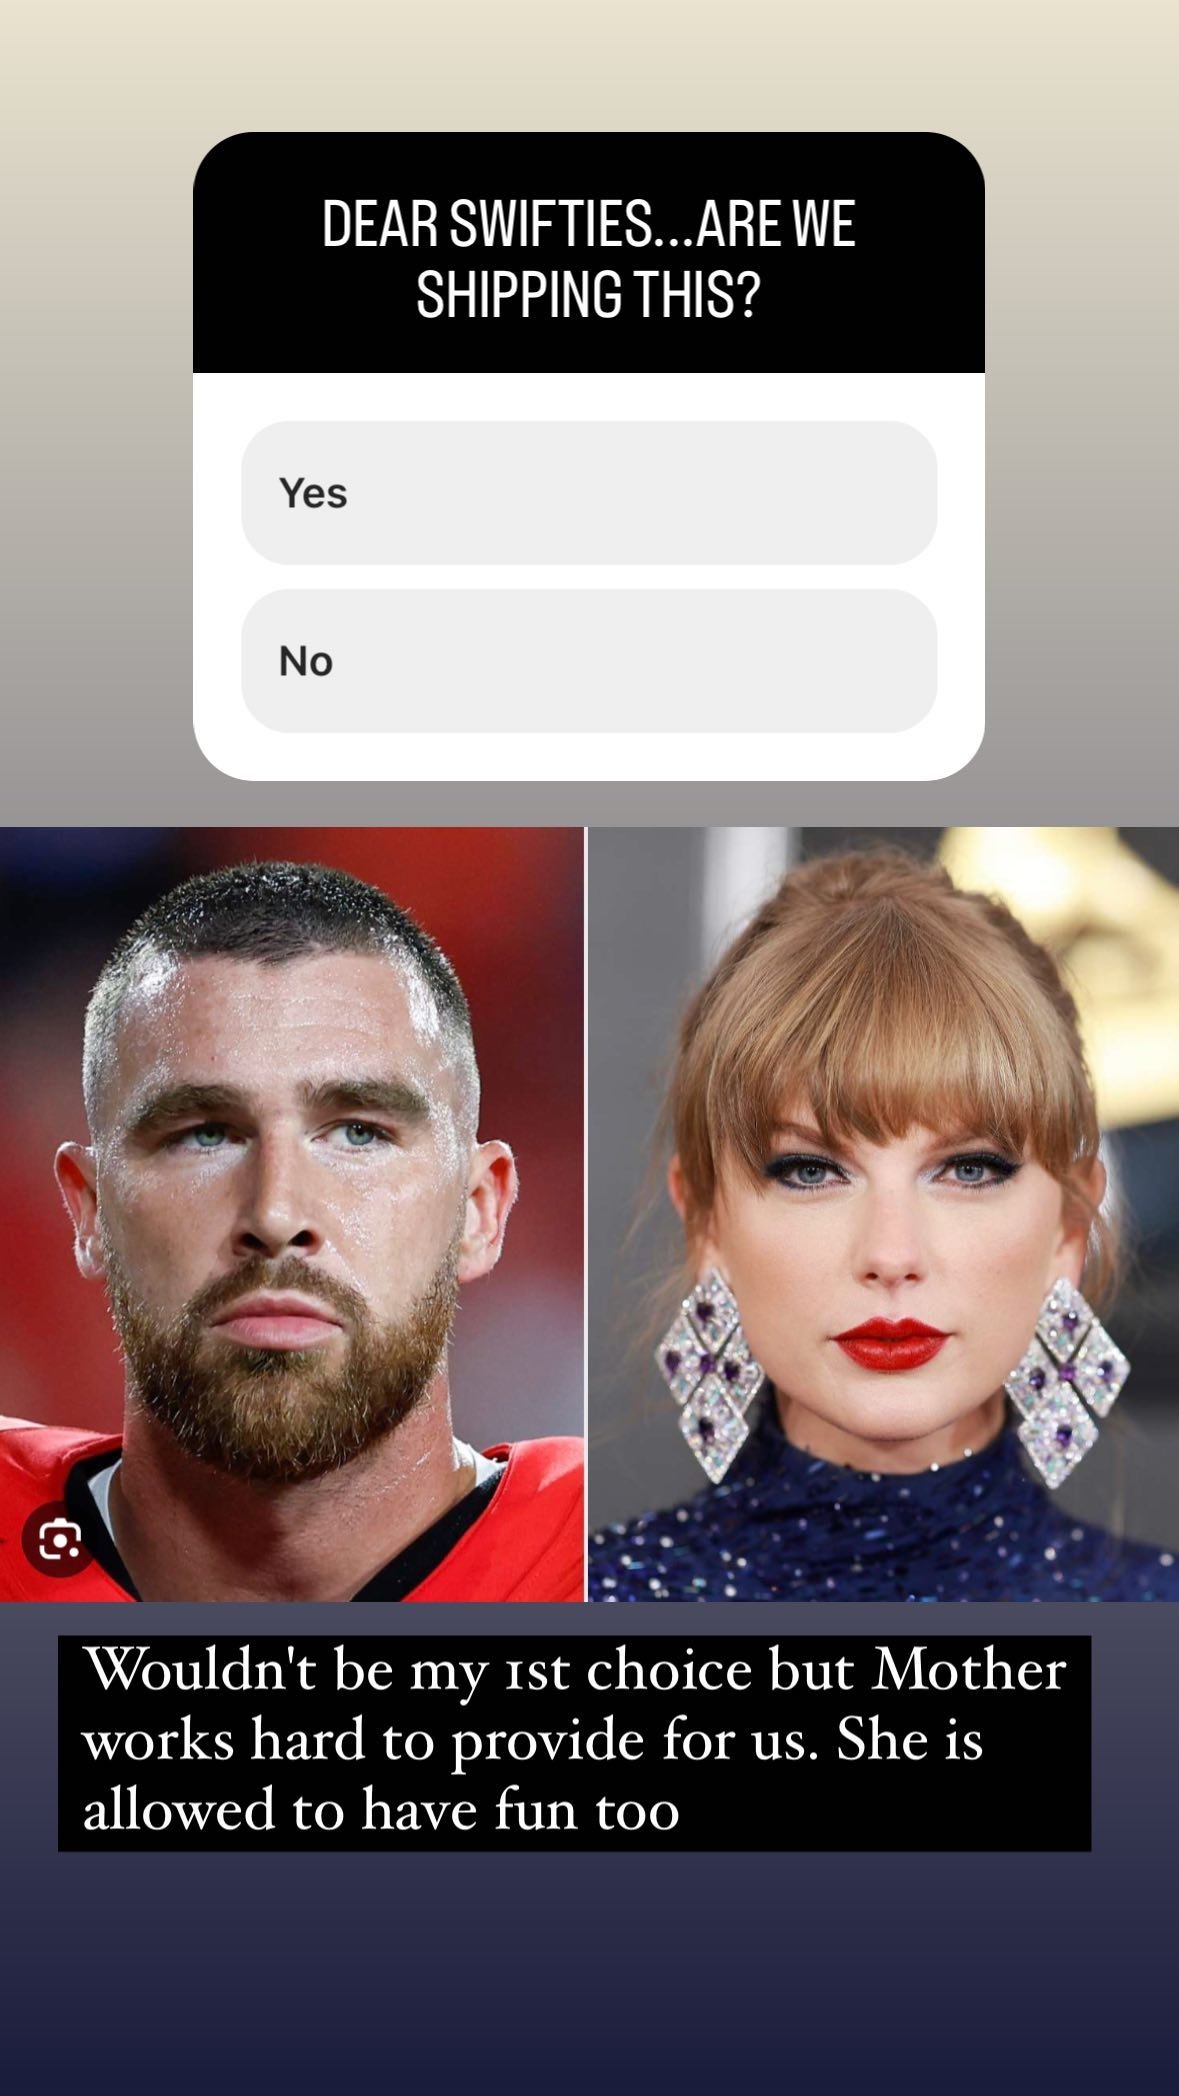 Taking to his Instagram Story, the self-confessed Swiftie posted a poll asking fans if they "ship" the rumored pairing.